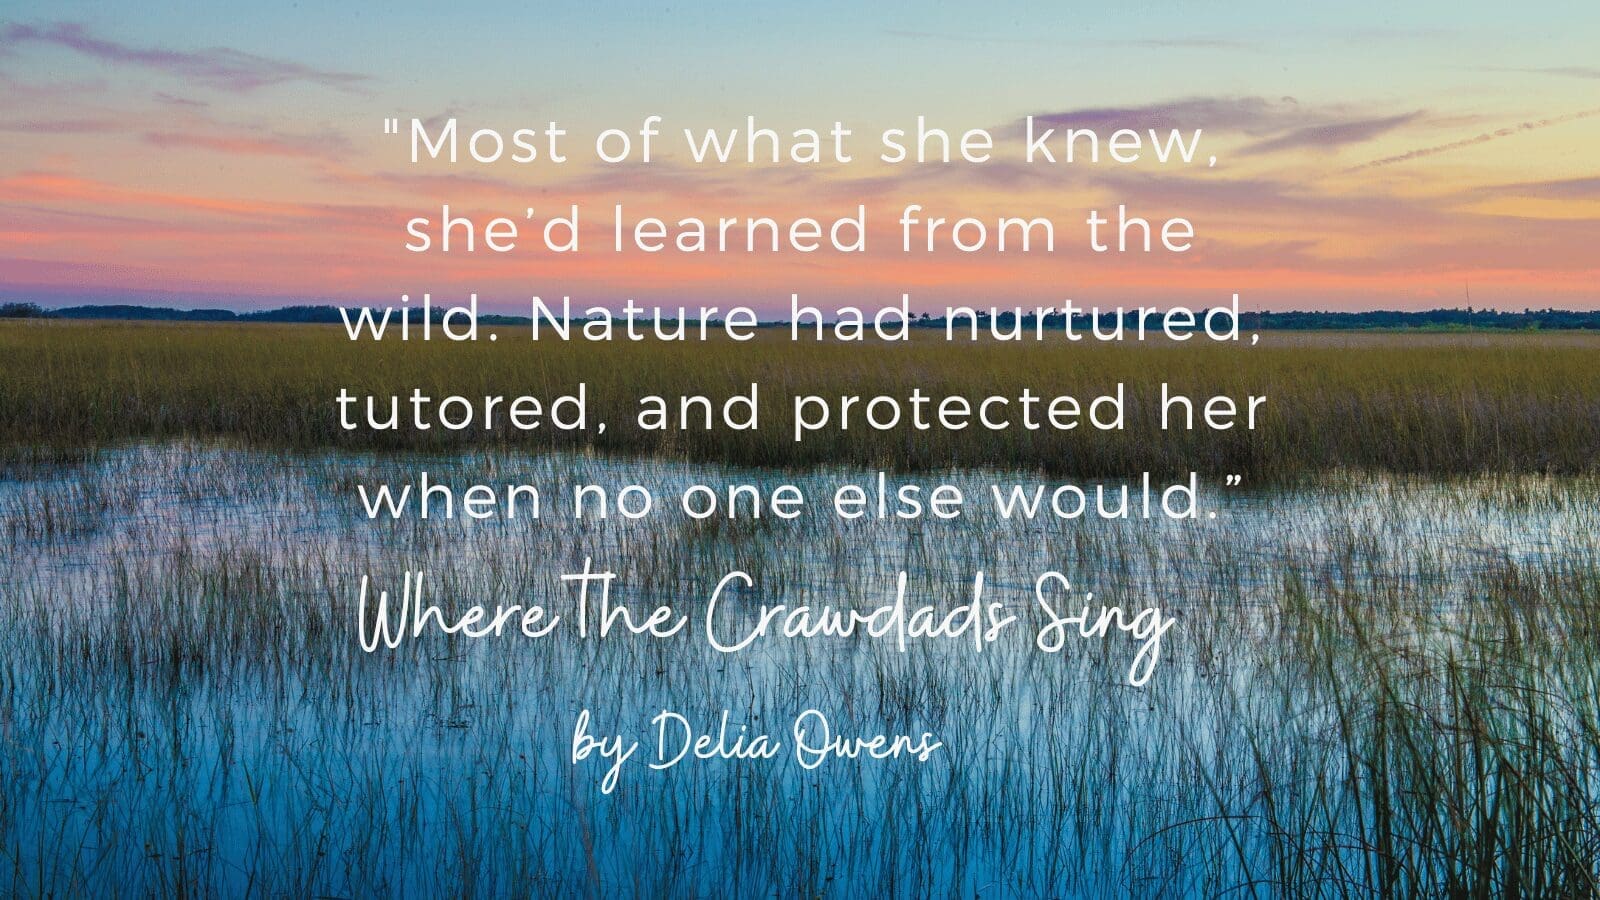 Most of what she knew she'd learned from the wild where the crawdads sing quote